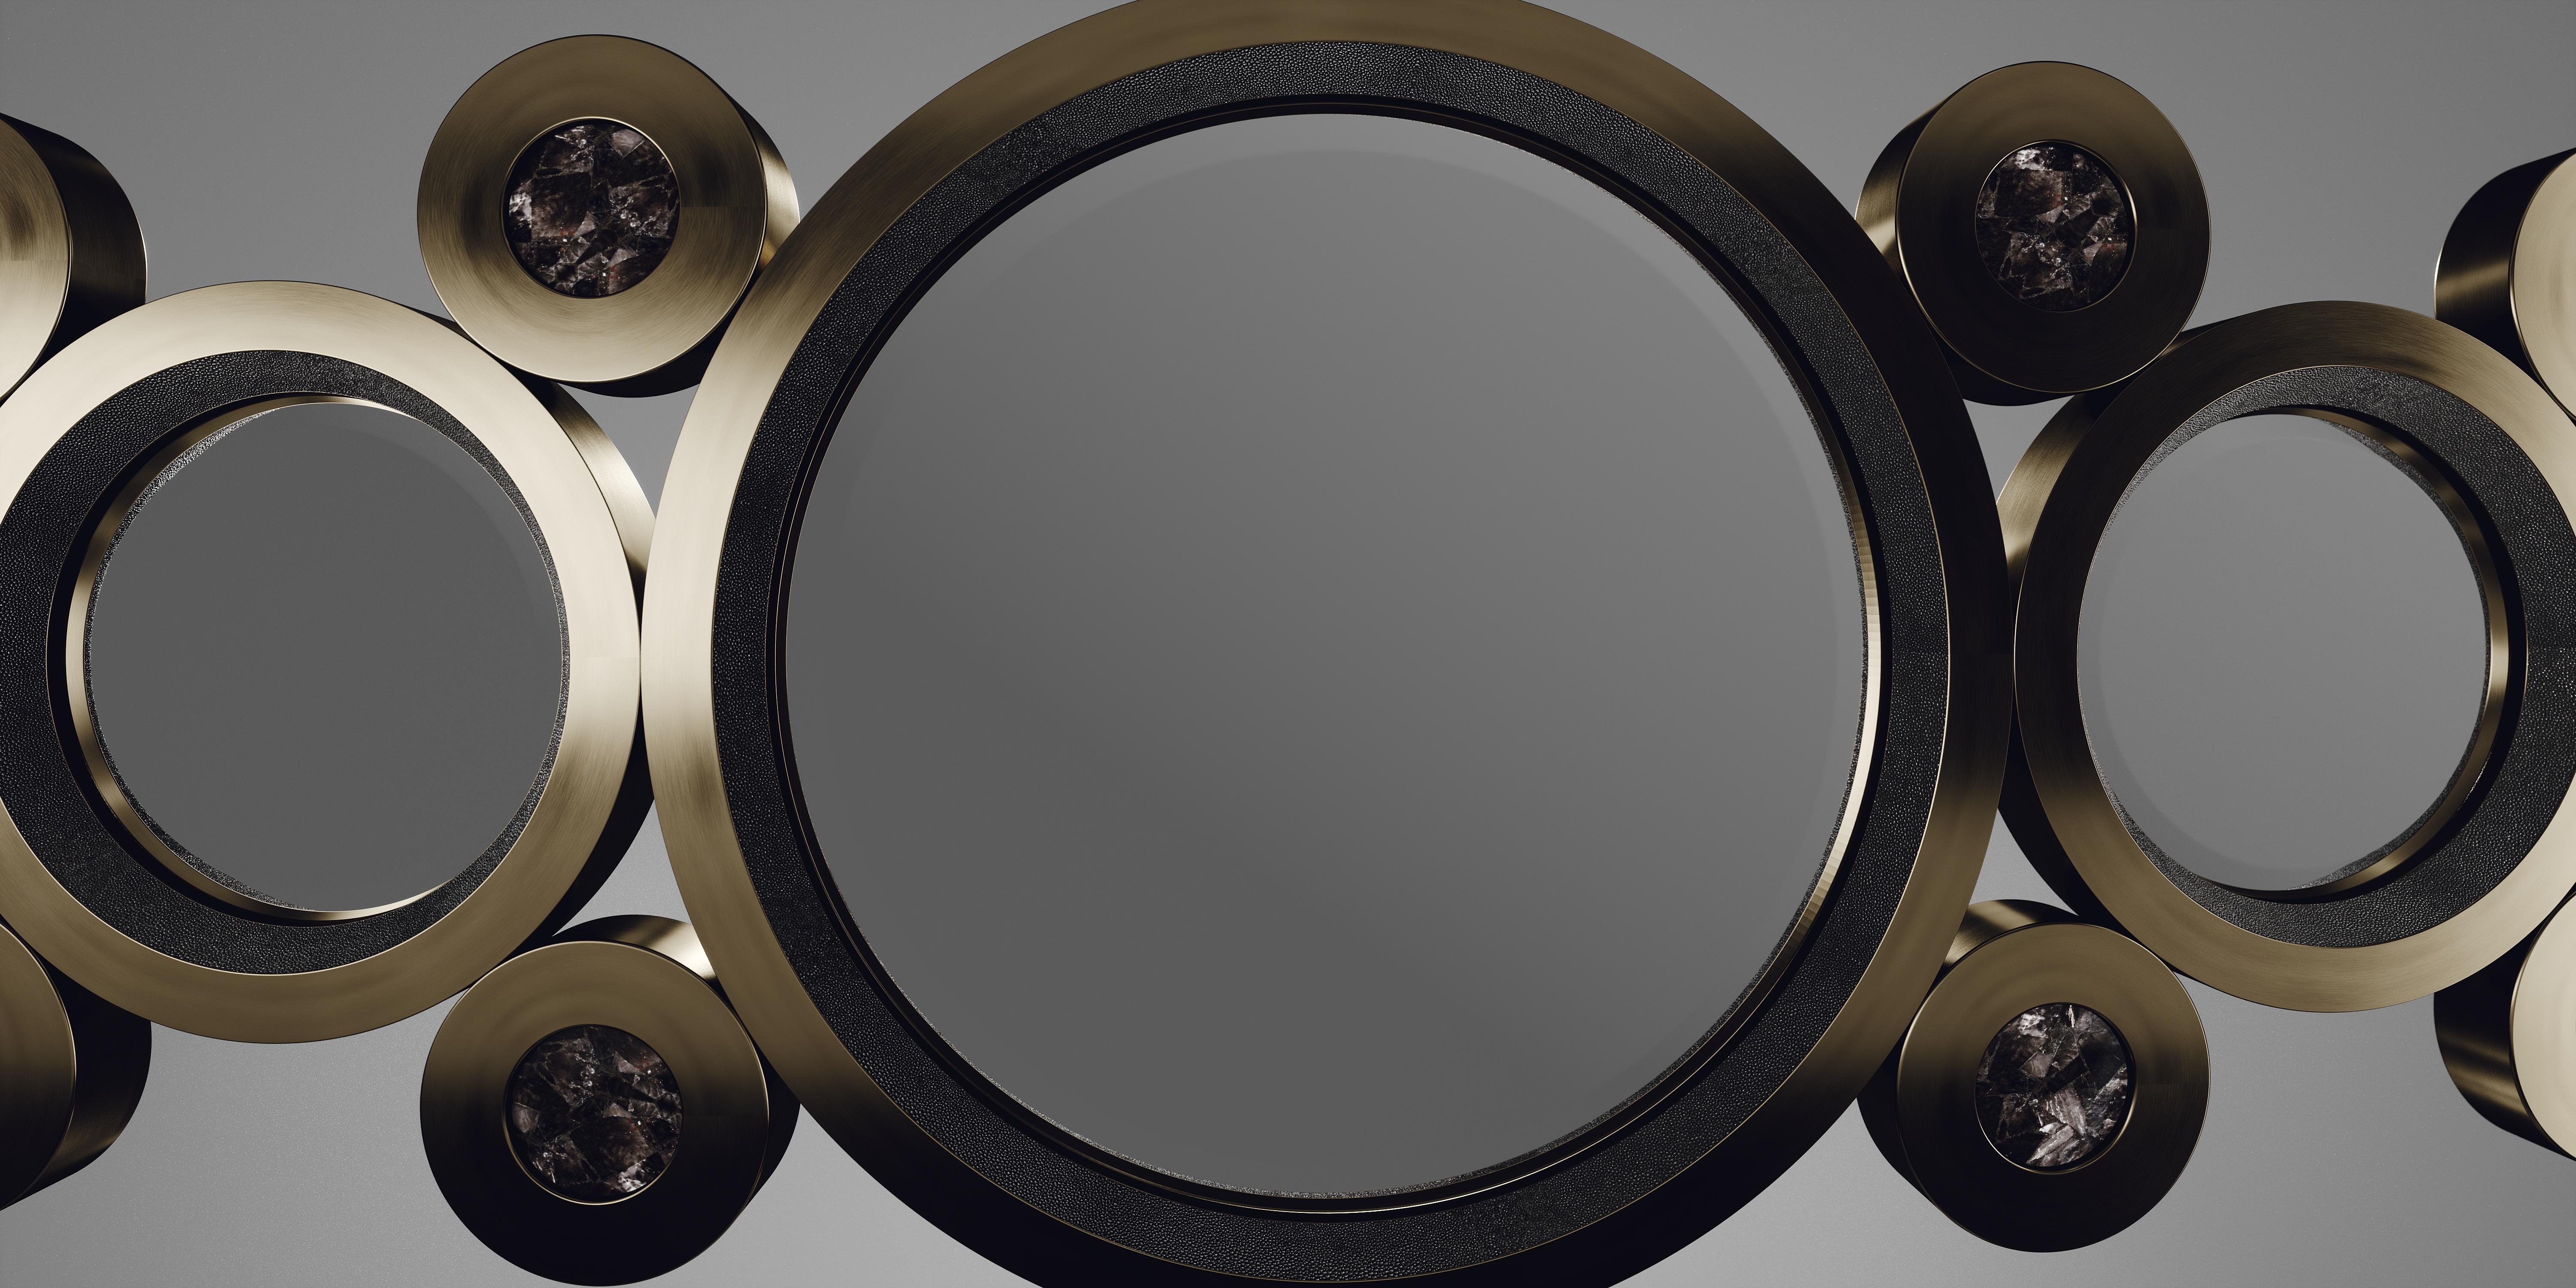 The circle mirror by R&Y Augousti in coal black shagreen, black quartz and dark bronze-patina brass, is an archive piece of theirs from the 1990s. The statement wall piece adds drama and flair to any space and shows the richness of their incredible